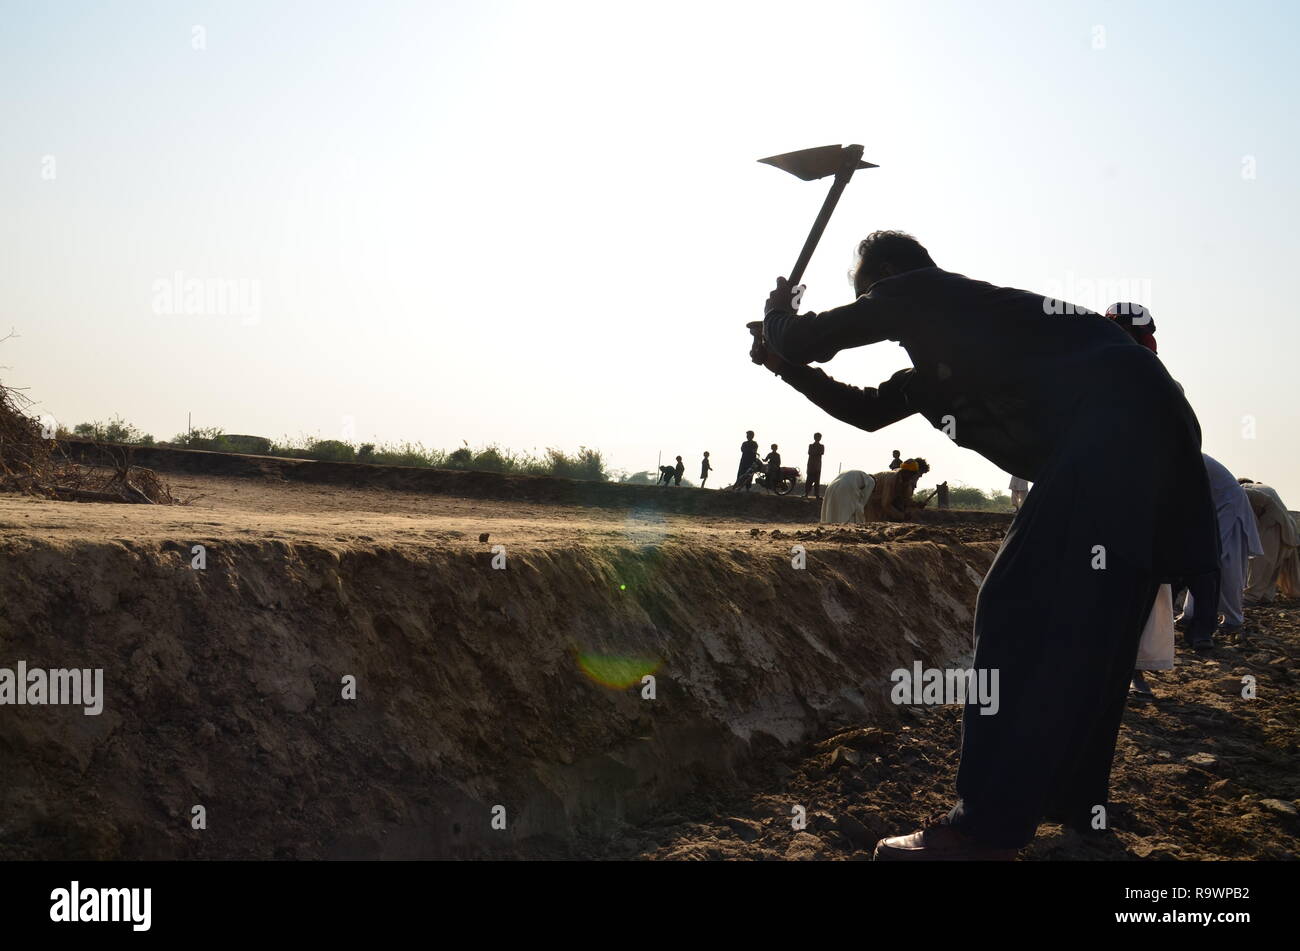 A man plows a canal in rural sindh, pakistan Stock Photo